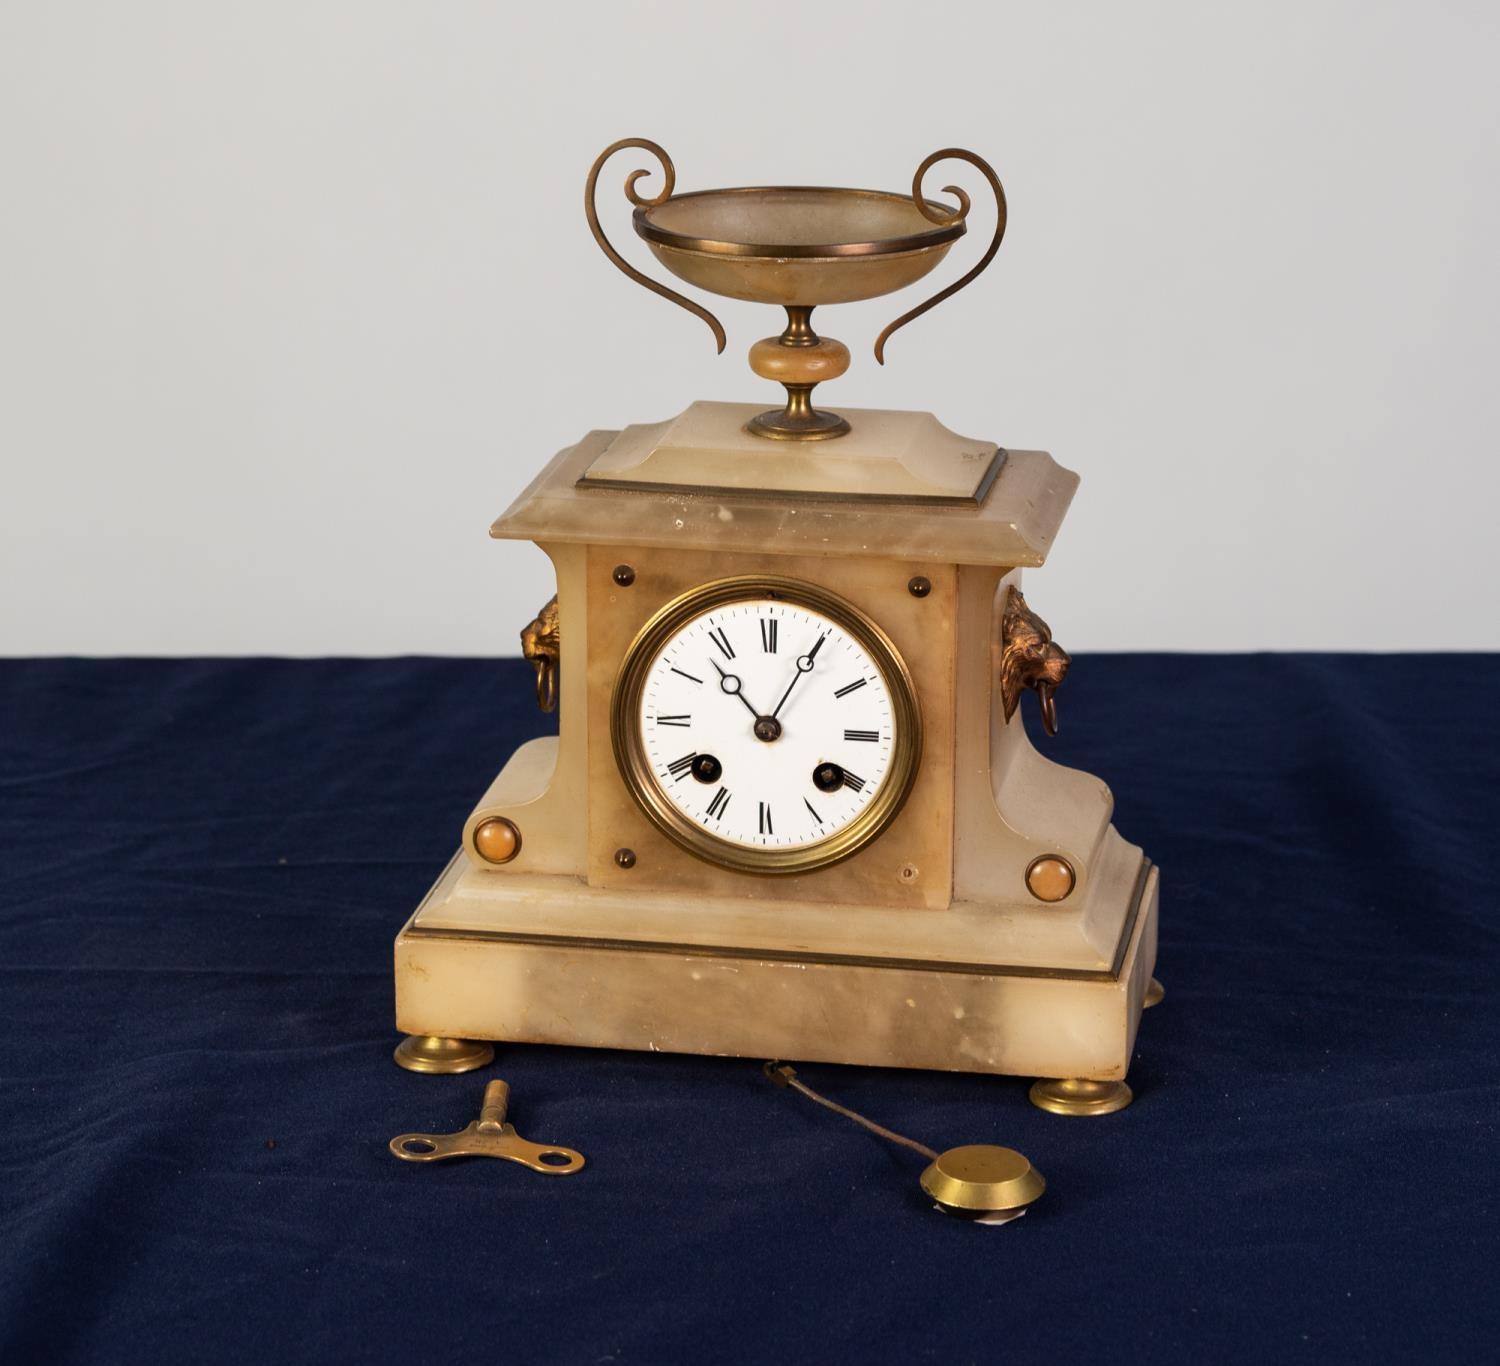 LATE VICTORIAN WHITE ALABASTER AND GILT METAL MANTEL CLOCK, of architectural form with two handle